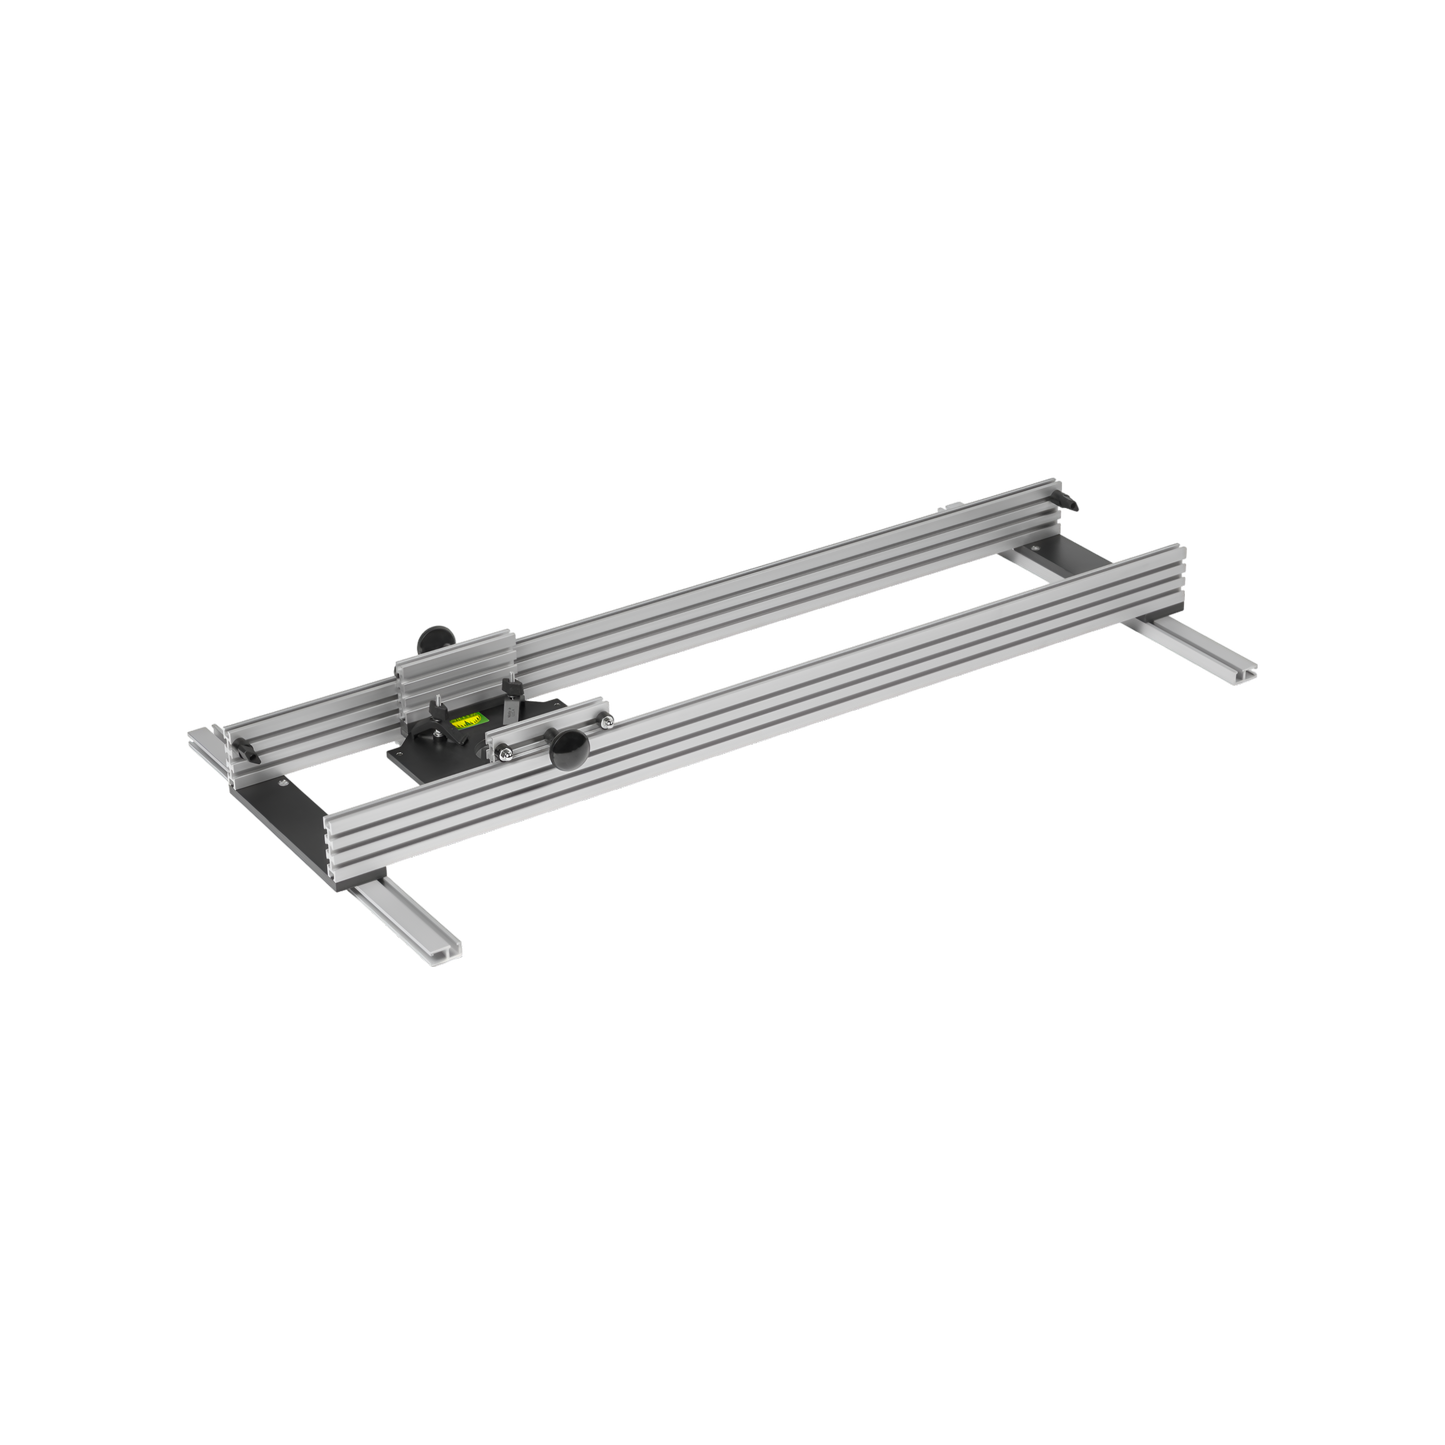 Ultra Track Planing Sled - Select Working Width